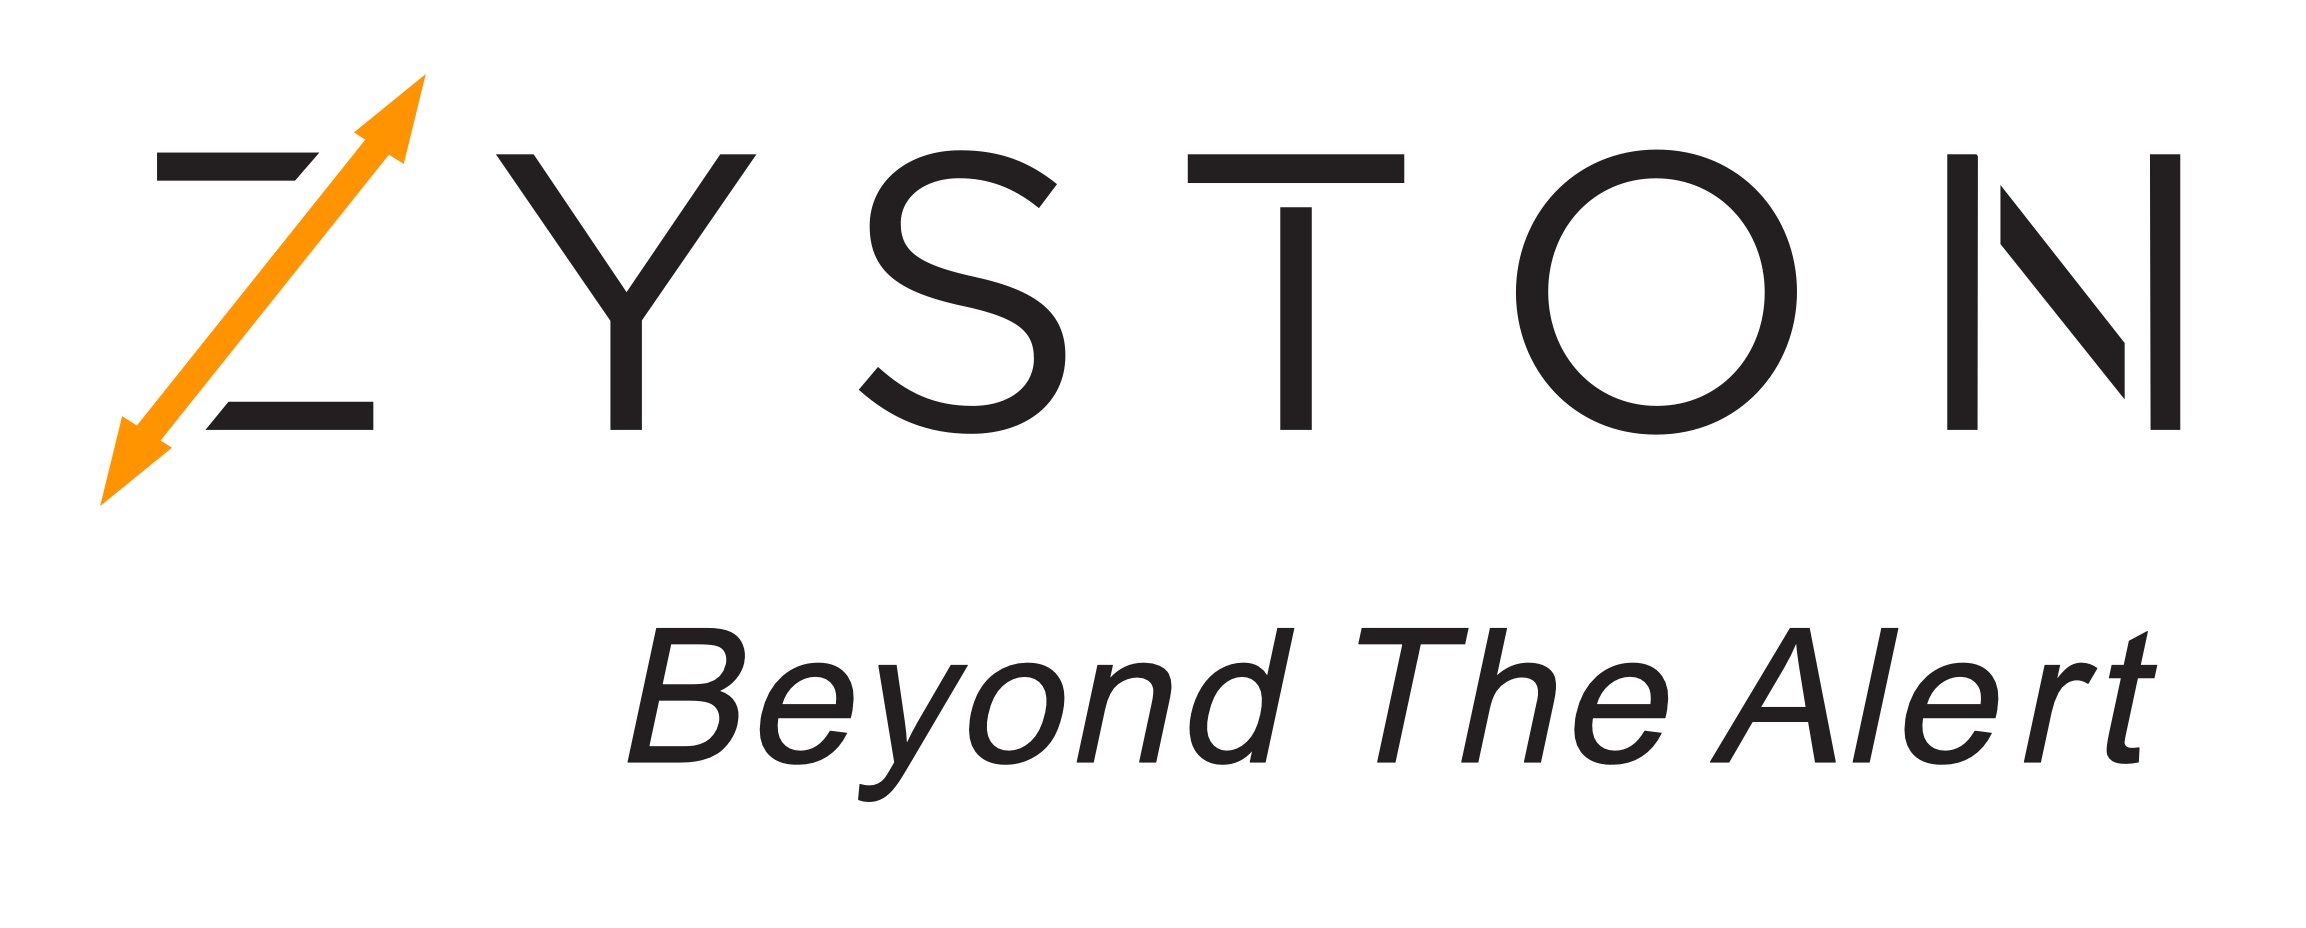 Zyston Cybersecurity MSSP & XDR Solutions - Beyond the Alert